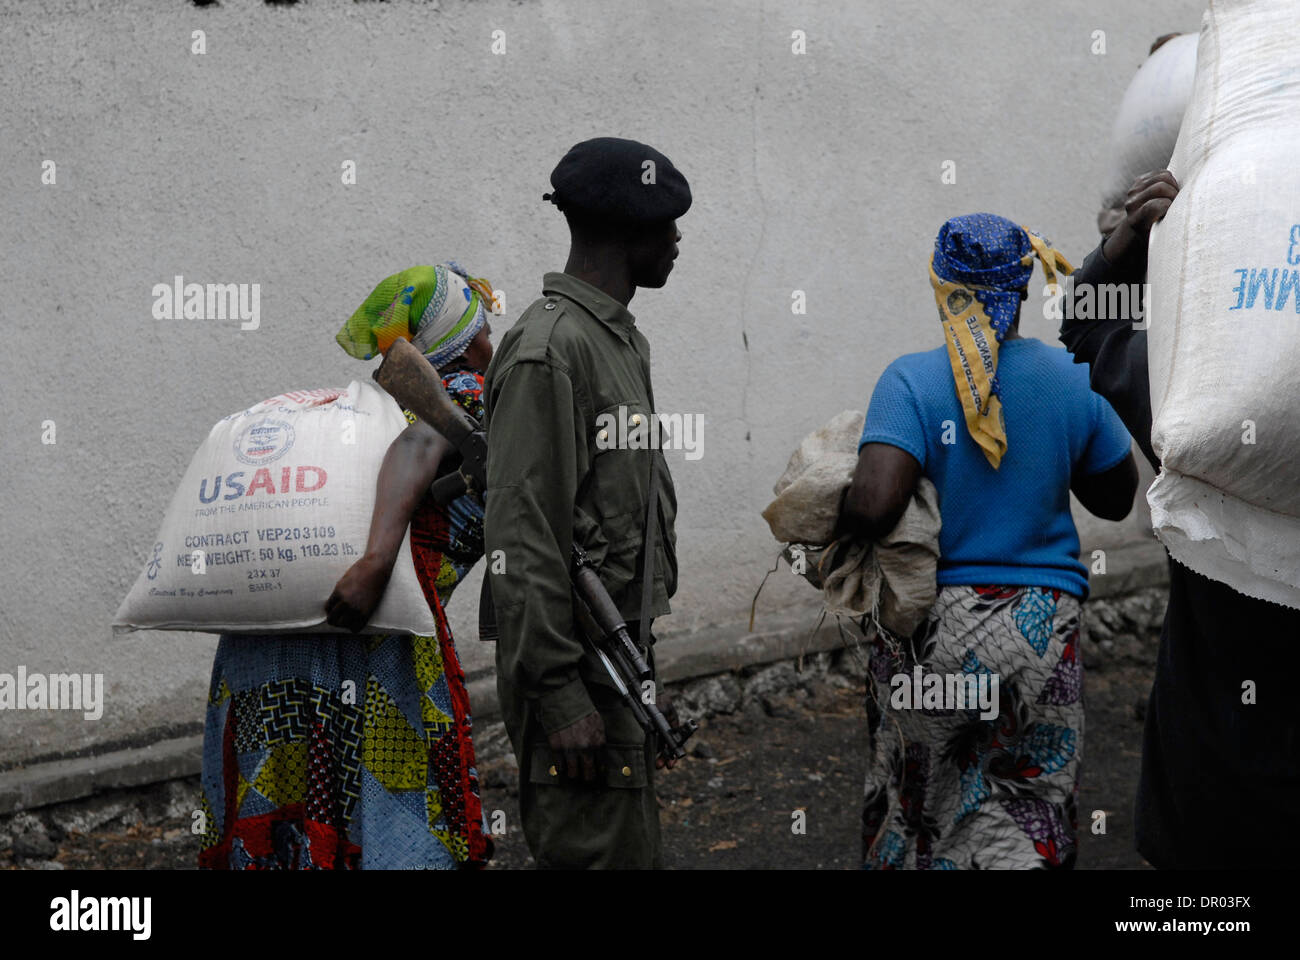 An armed FARDC Congolese government soldier stands guard as internally displaced women carry large sack of maize donated by USAID agency during food distribution carried out by the World Food Programme WFP in North Kivu province, Congo DR Africa Stock Photo